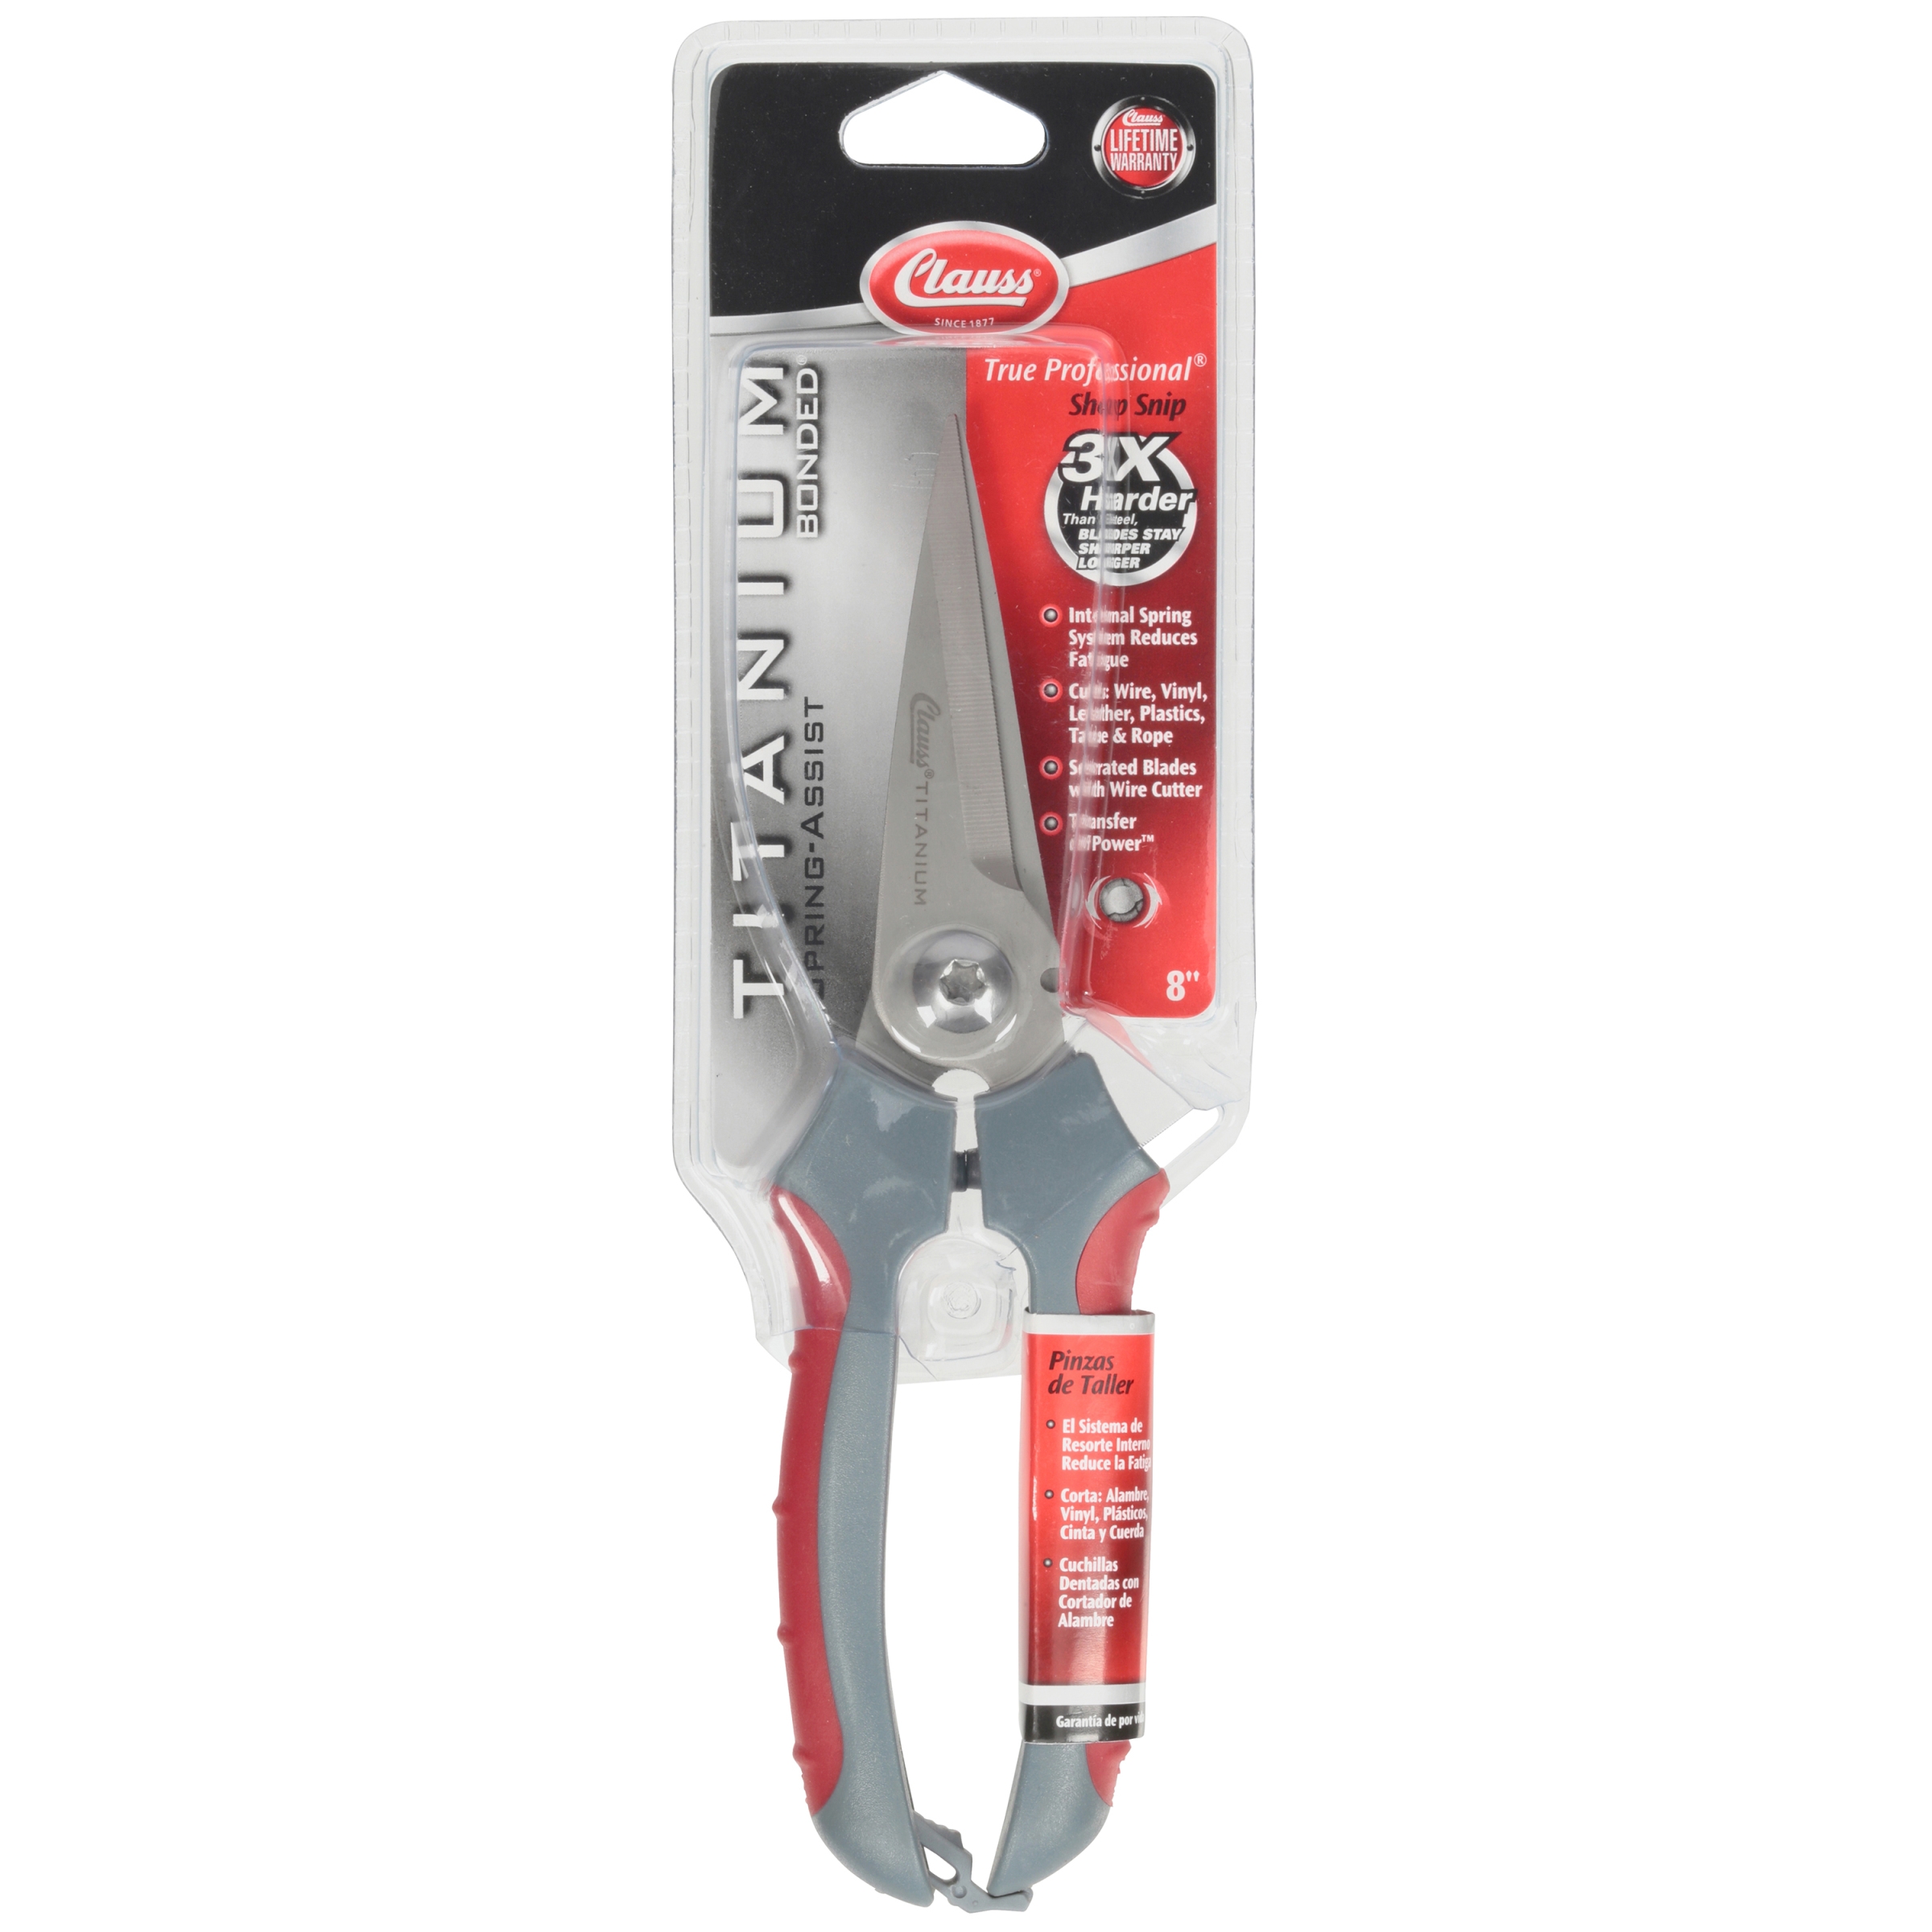 Clauss 8" Titanium Bonded Straight Micro-Serrated Snip, Hand Tool Pliers, Red and Gray - image 4 of 8